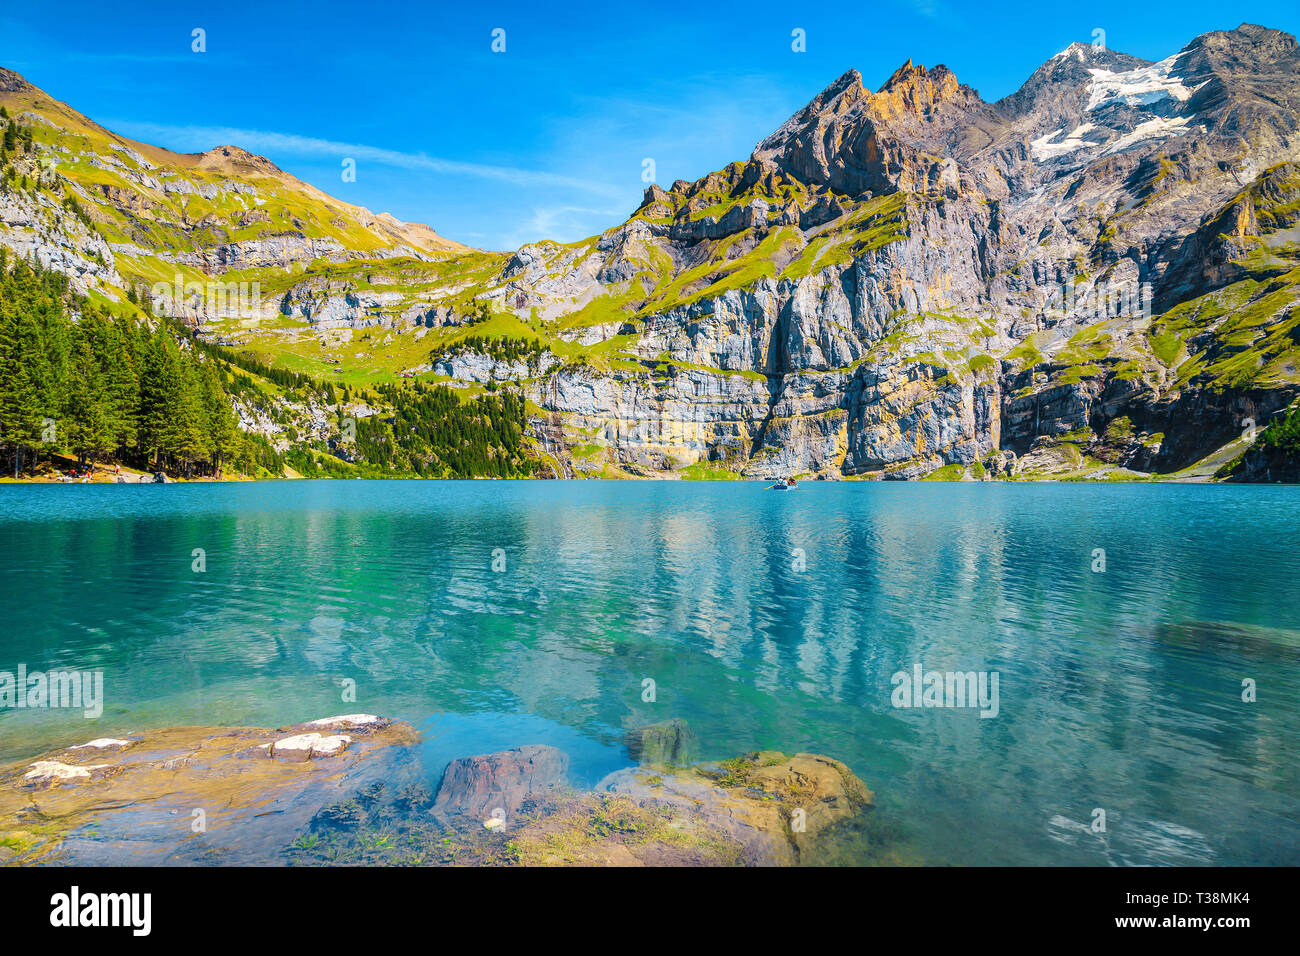 Fantastic travel and tourism location, amazing alpine lake and snowy mountains with glaciers, Oeschinensee lake, Bernese Oberland, Switzerland, Europe Stock Photo